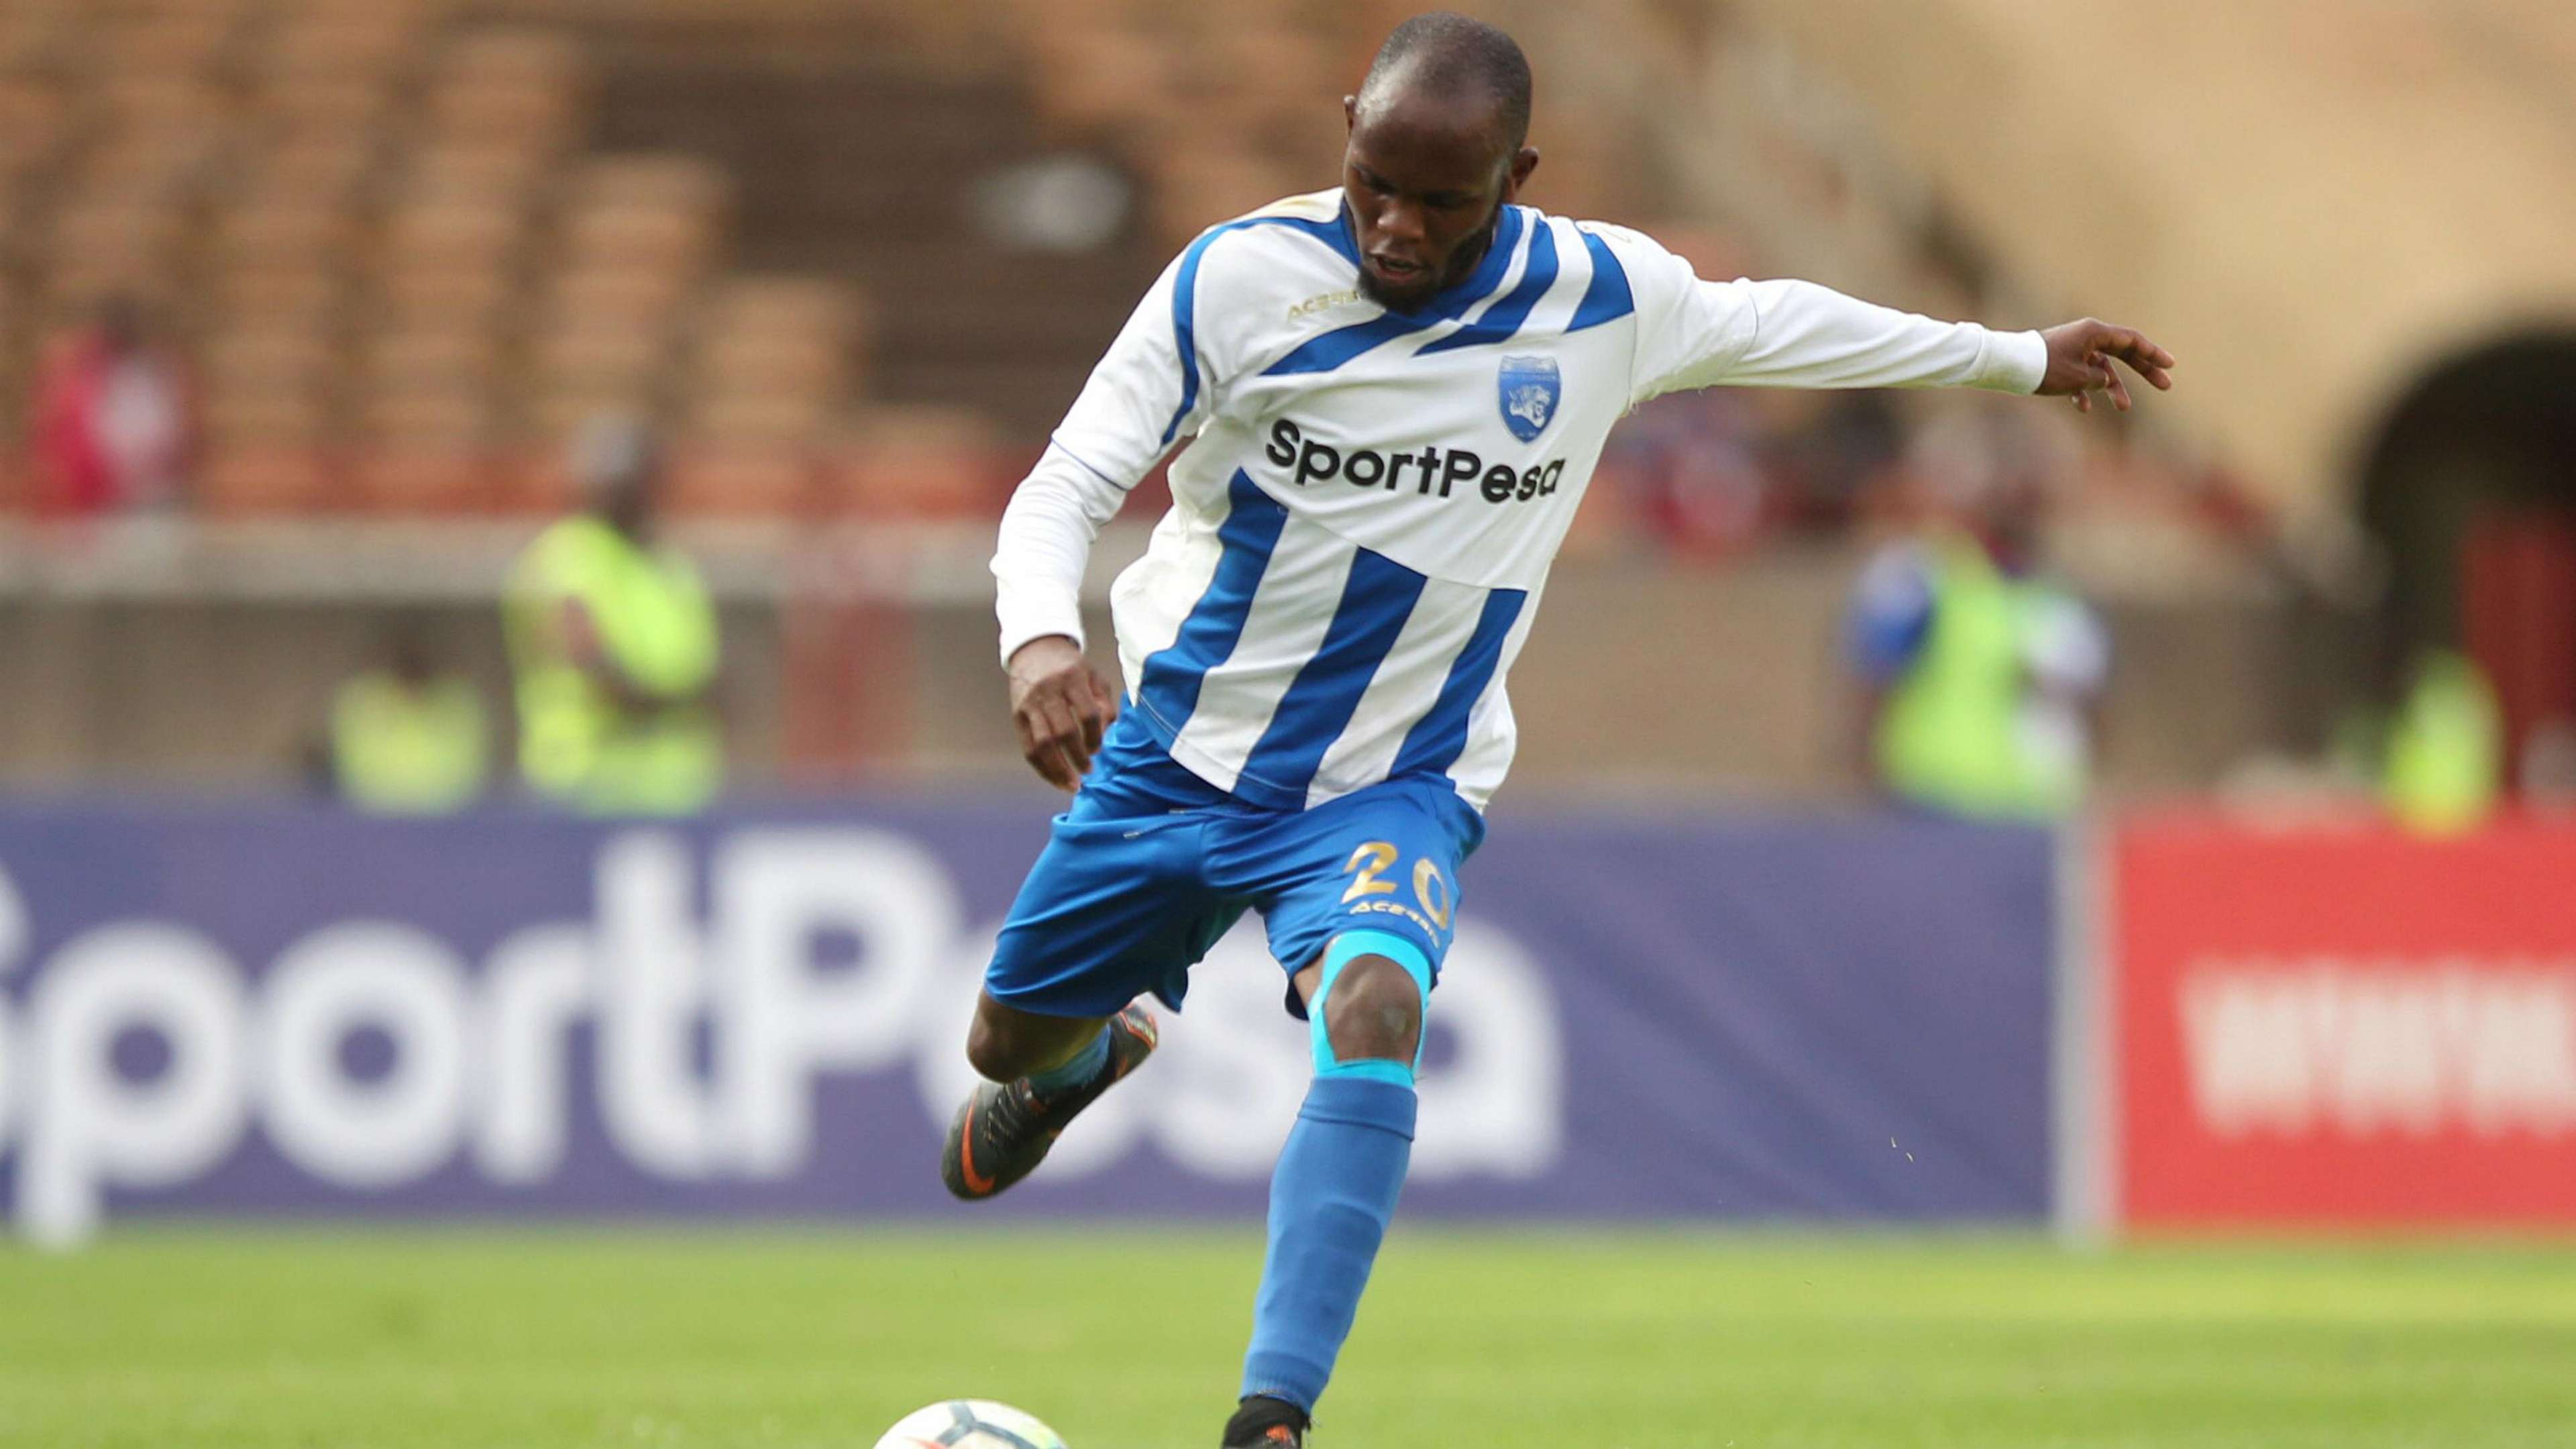 Whyvonne Isuza of AFC Leopards.